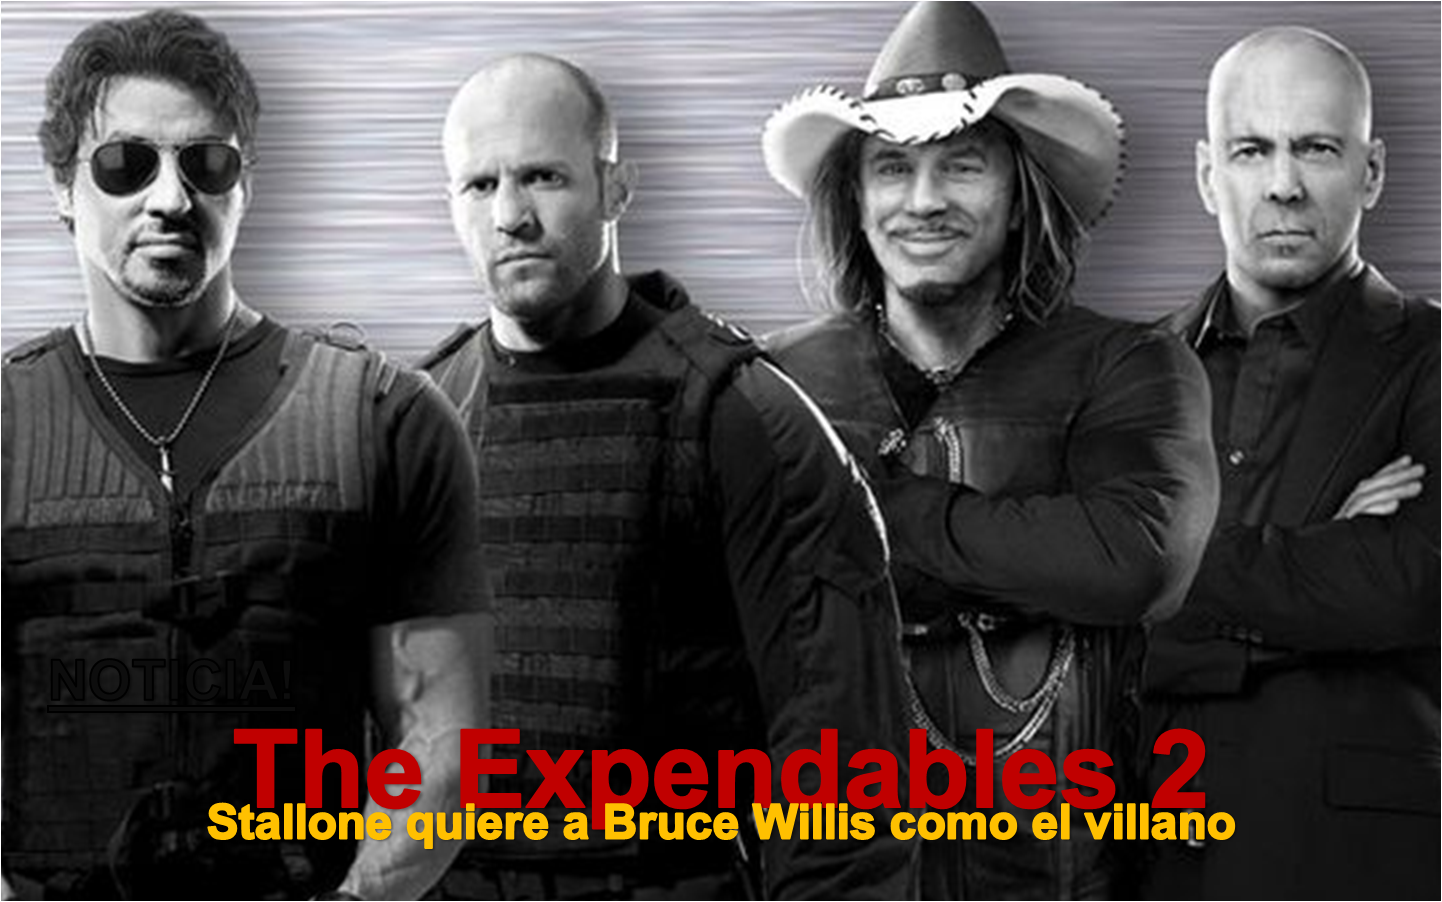 http://1.bp.blogspot.com/_dbXAbF1CTso/TH2Fa2BevfI/AAAAAAAABBs/oGB6gAyCyHI/s1600/The+Expendables+Bruce+Willis.png